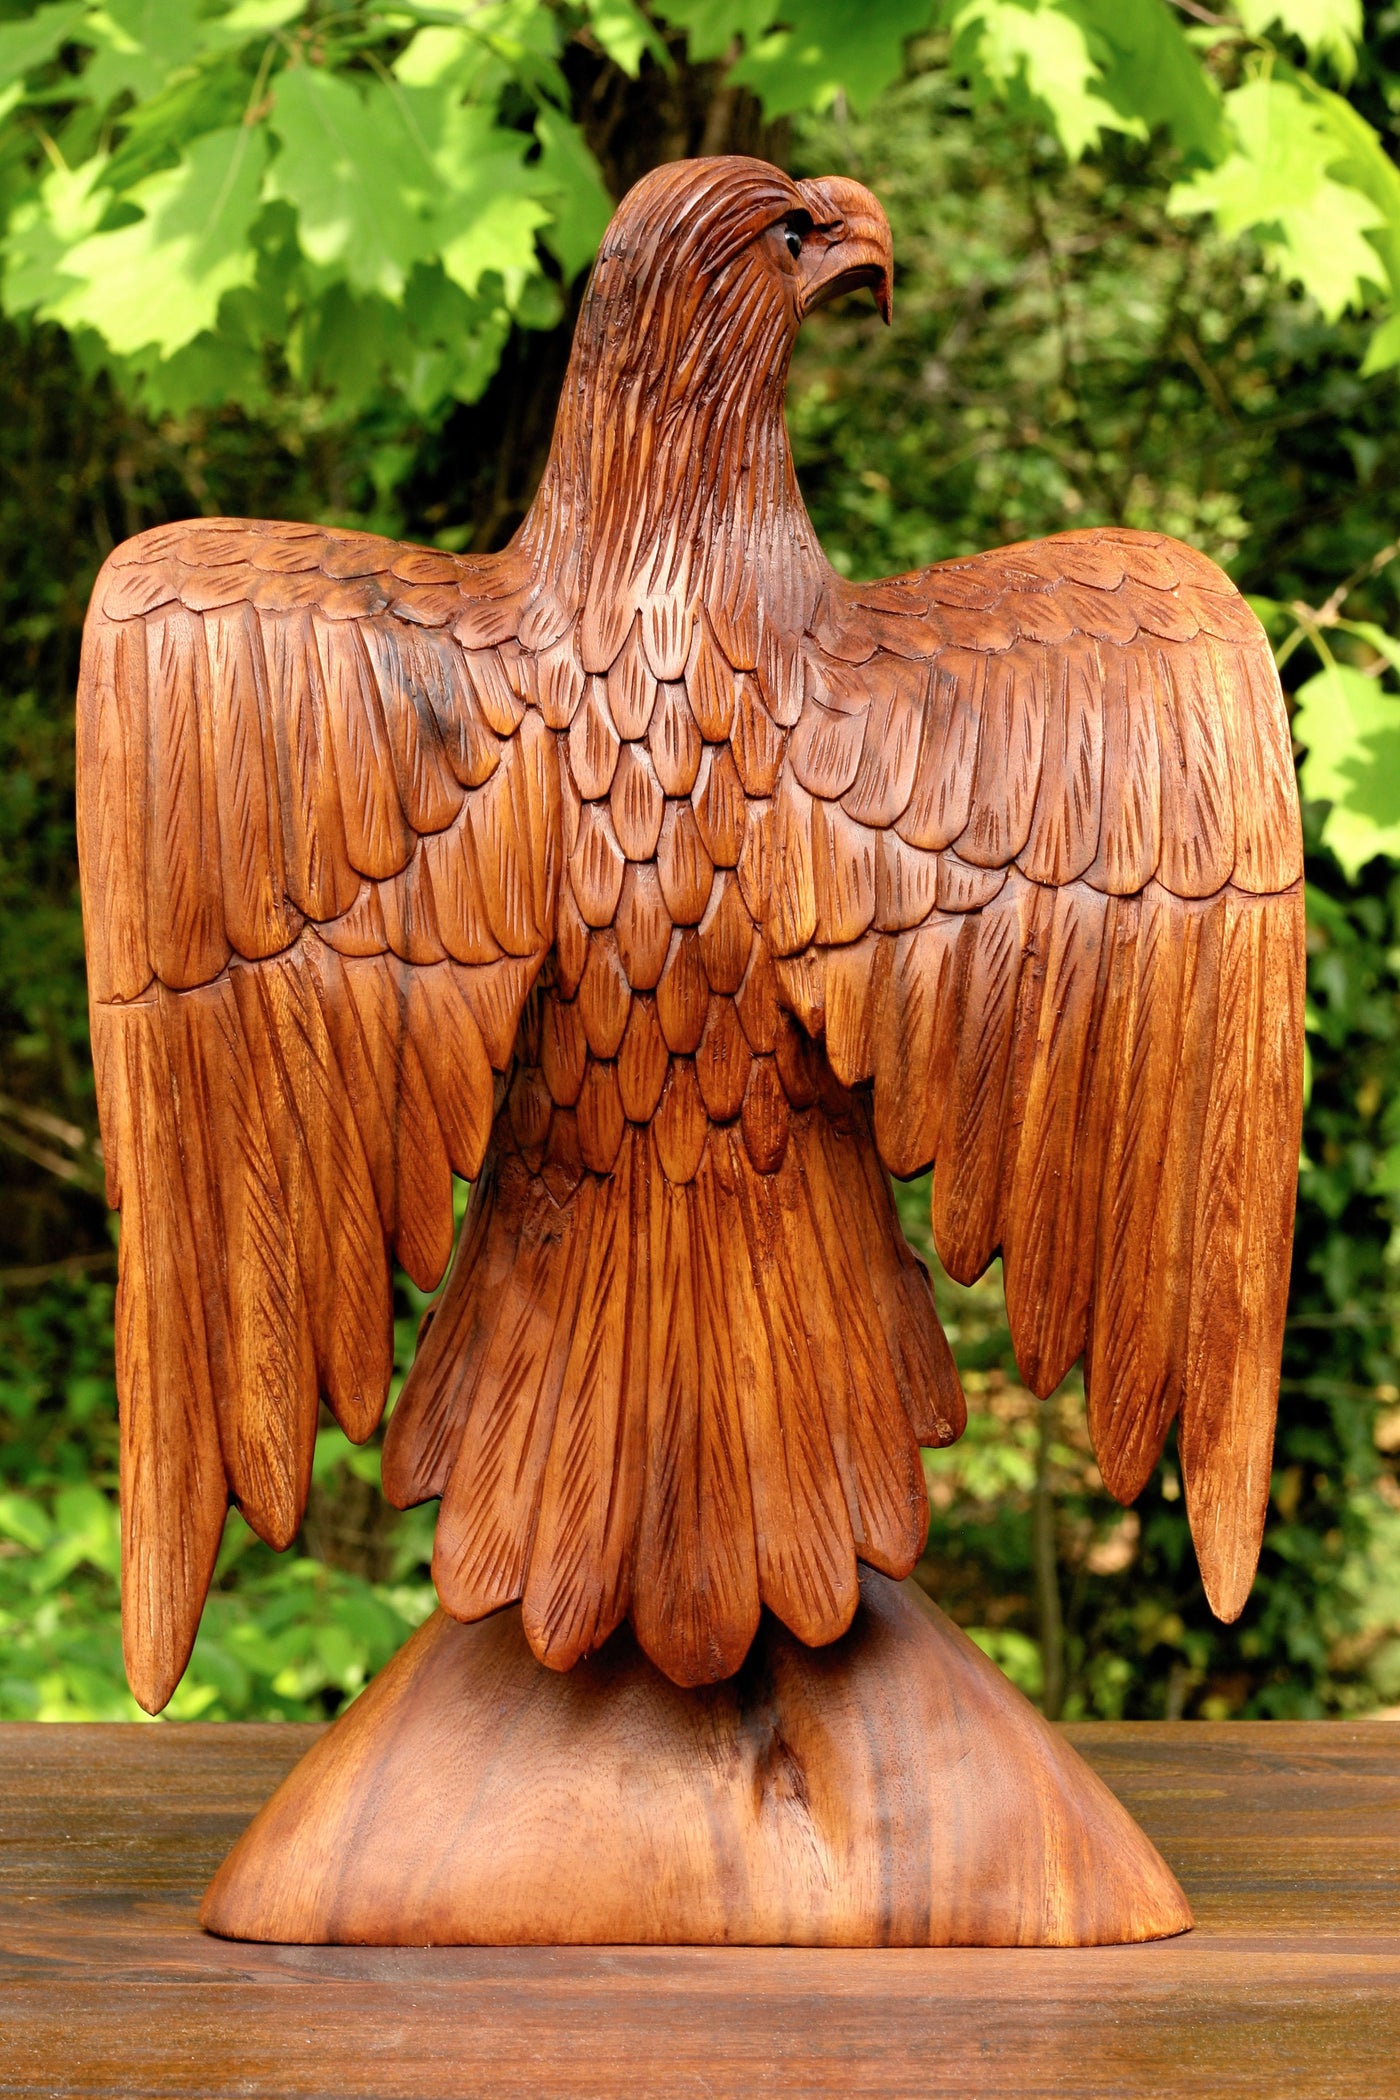 16" Huge Extra Large Big Wooden Handmade American Eagle Statue Handcrafted Figurine Sculpture Art Hand Carved Rustic Lodge Outdoor Decorative Home Decor Us Accent Decoration